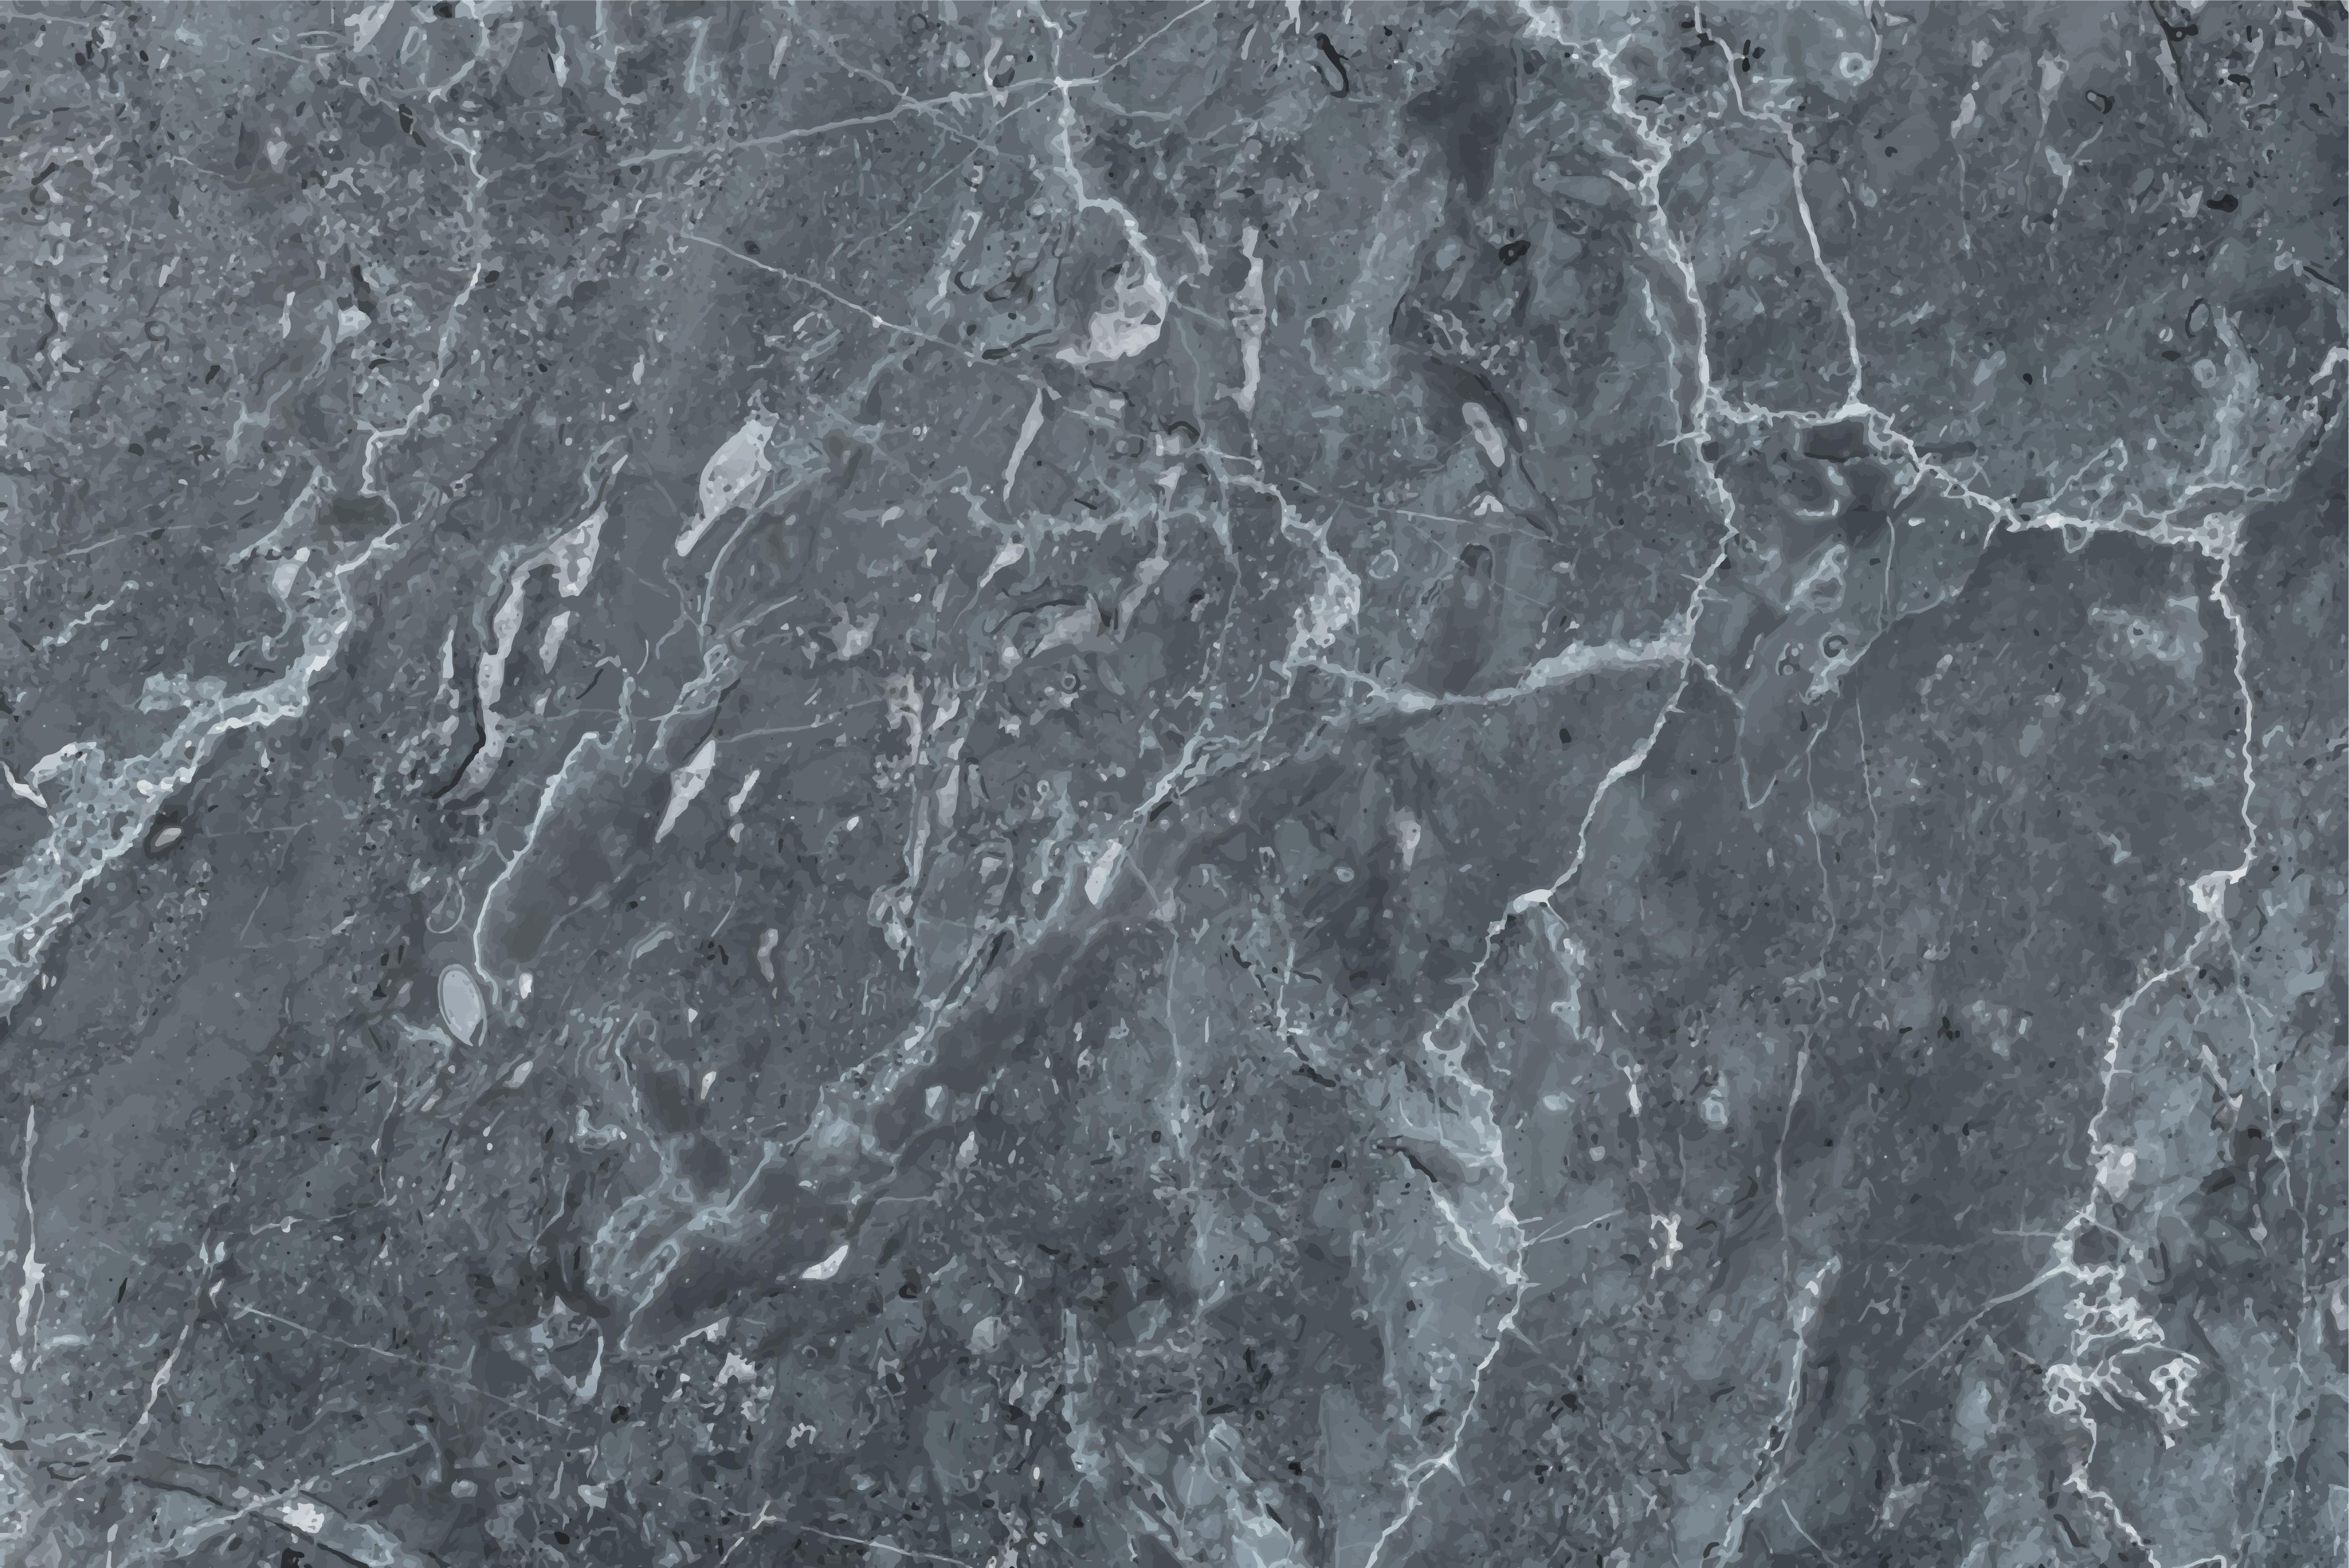 4676 x 3121 · jpeg - Gray marble textured background design - Download Free Vectors, Clipart ...